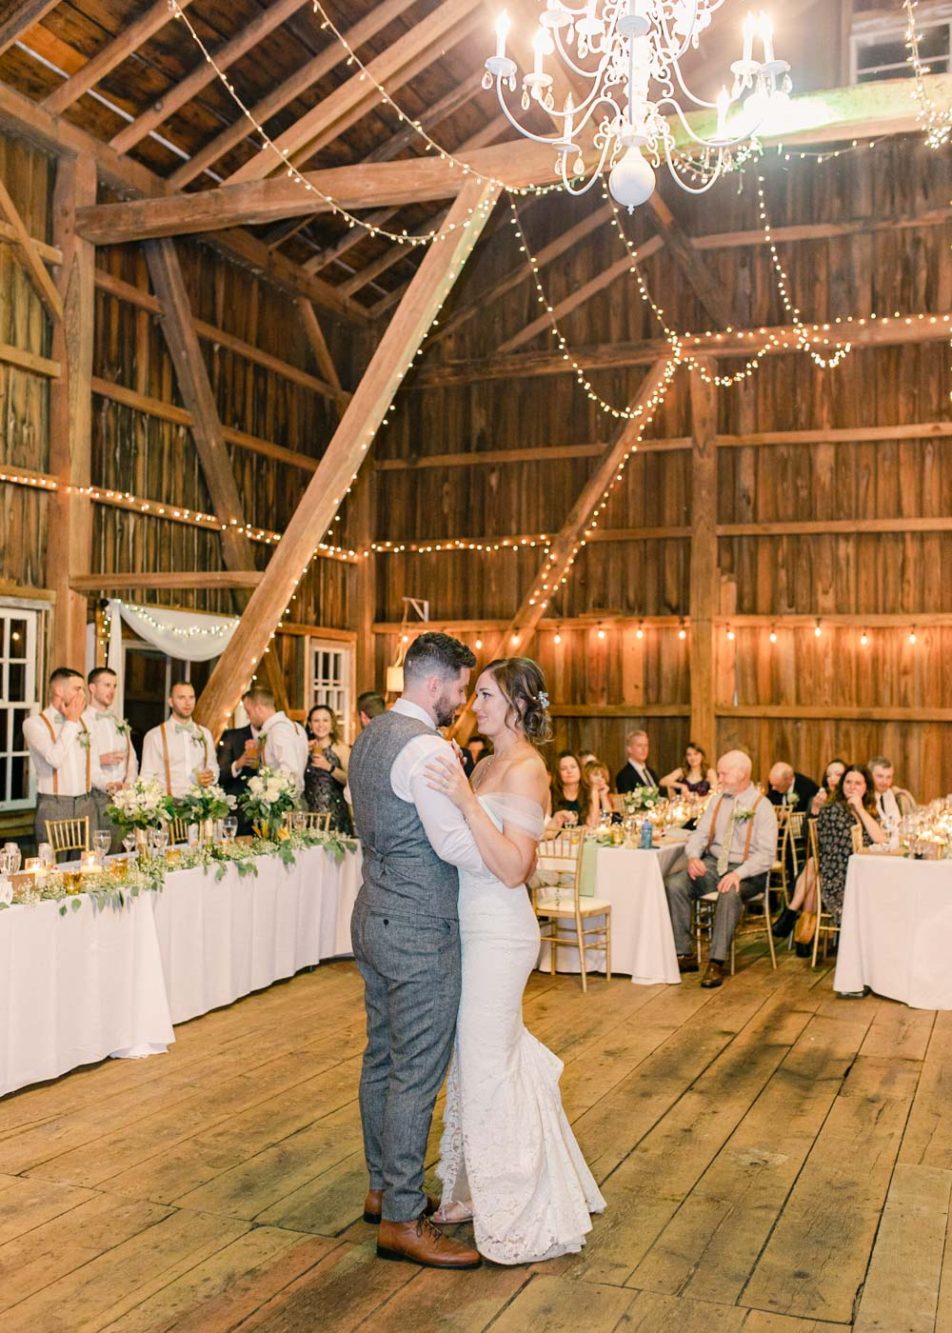 Couple's first dance at their Cleveland barn wedding